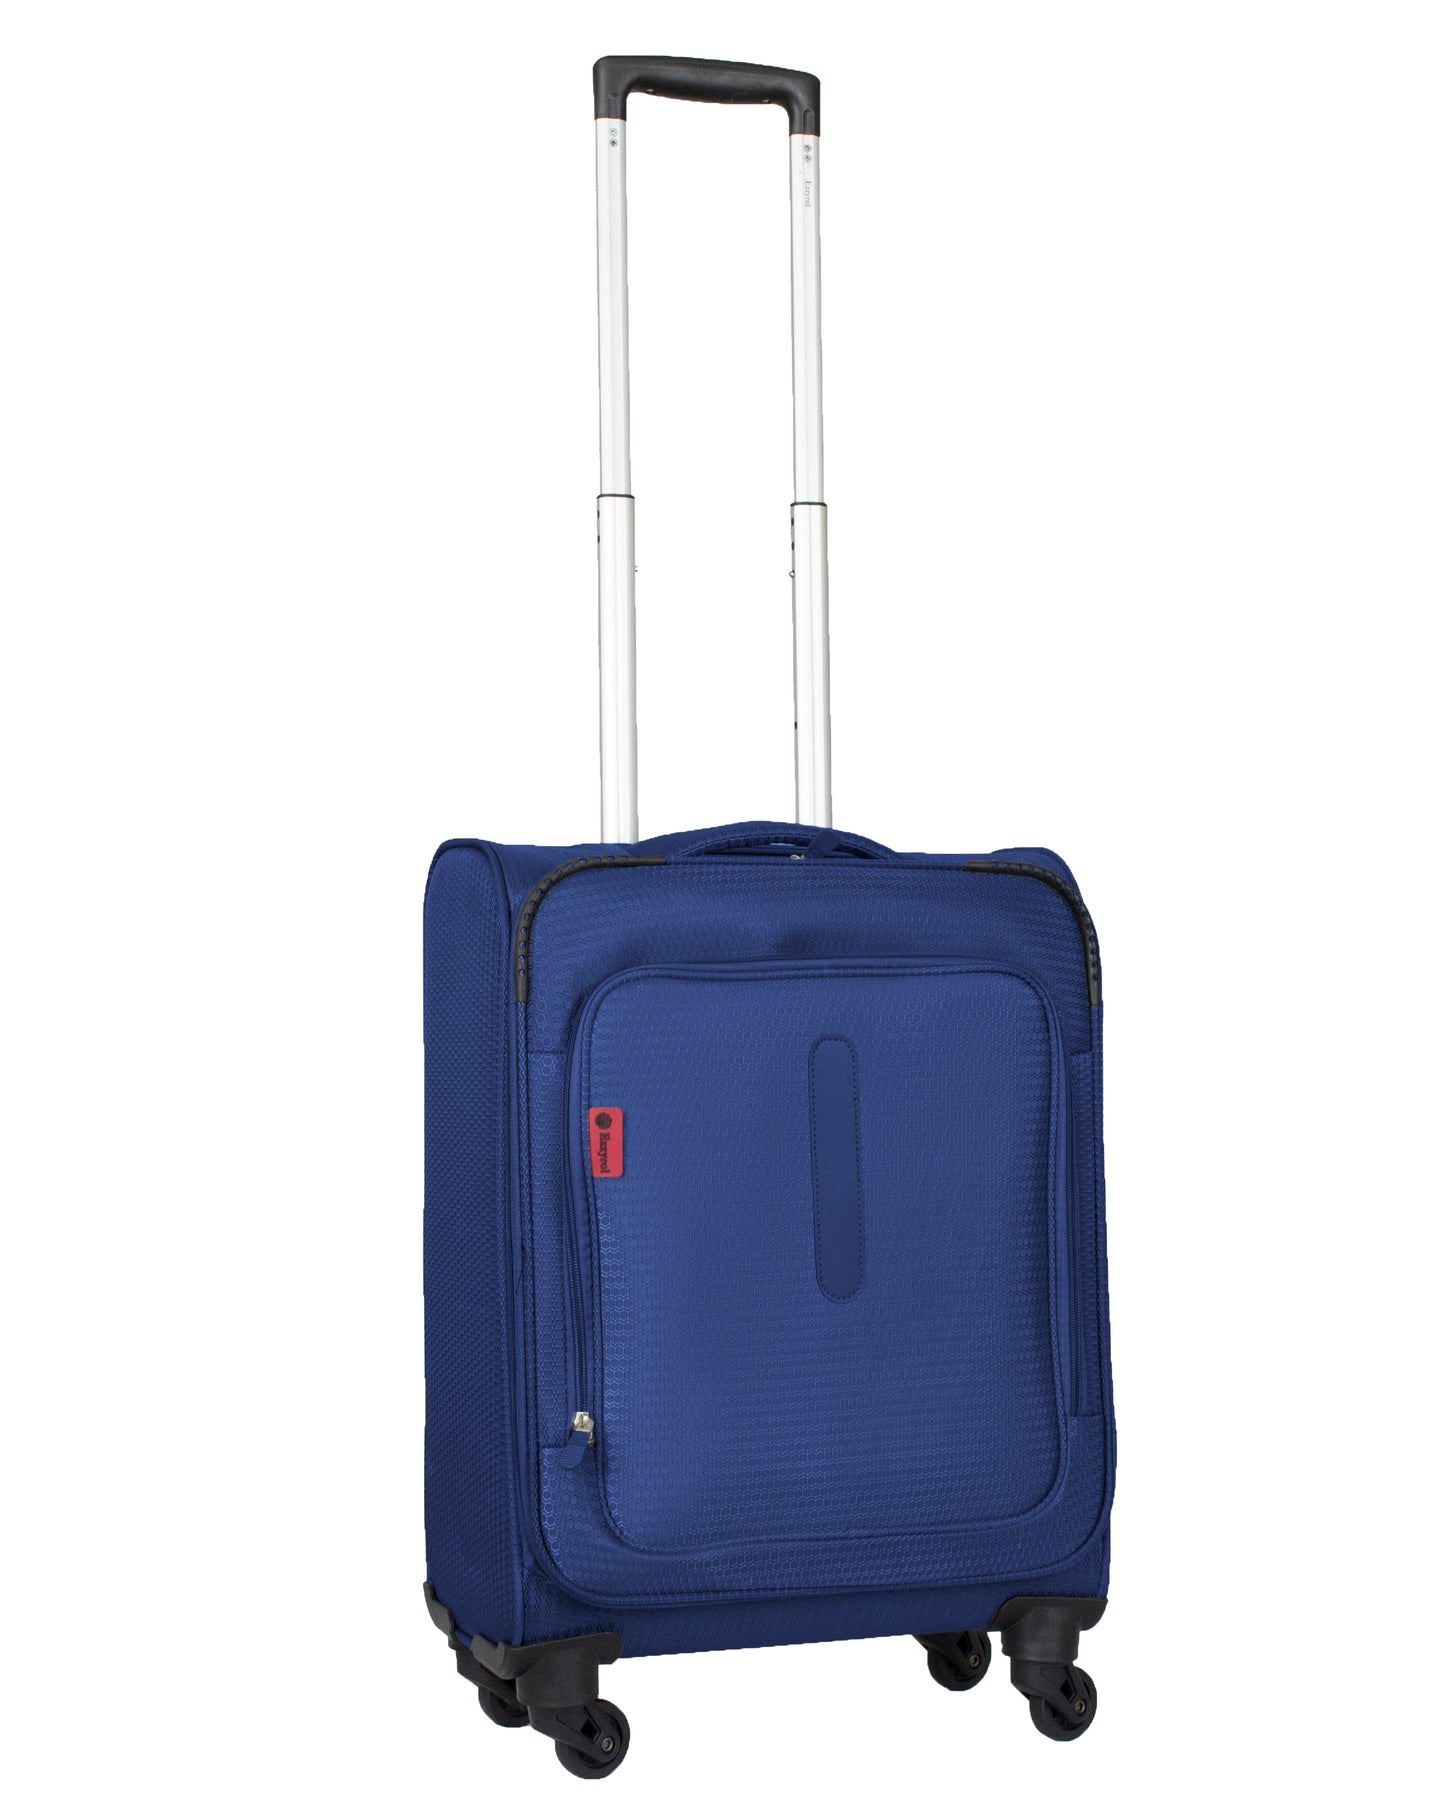 Cabin Size Soft Shell Suitcase Luggage